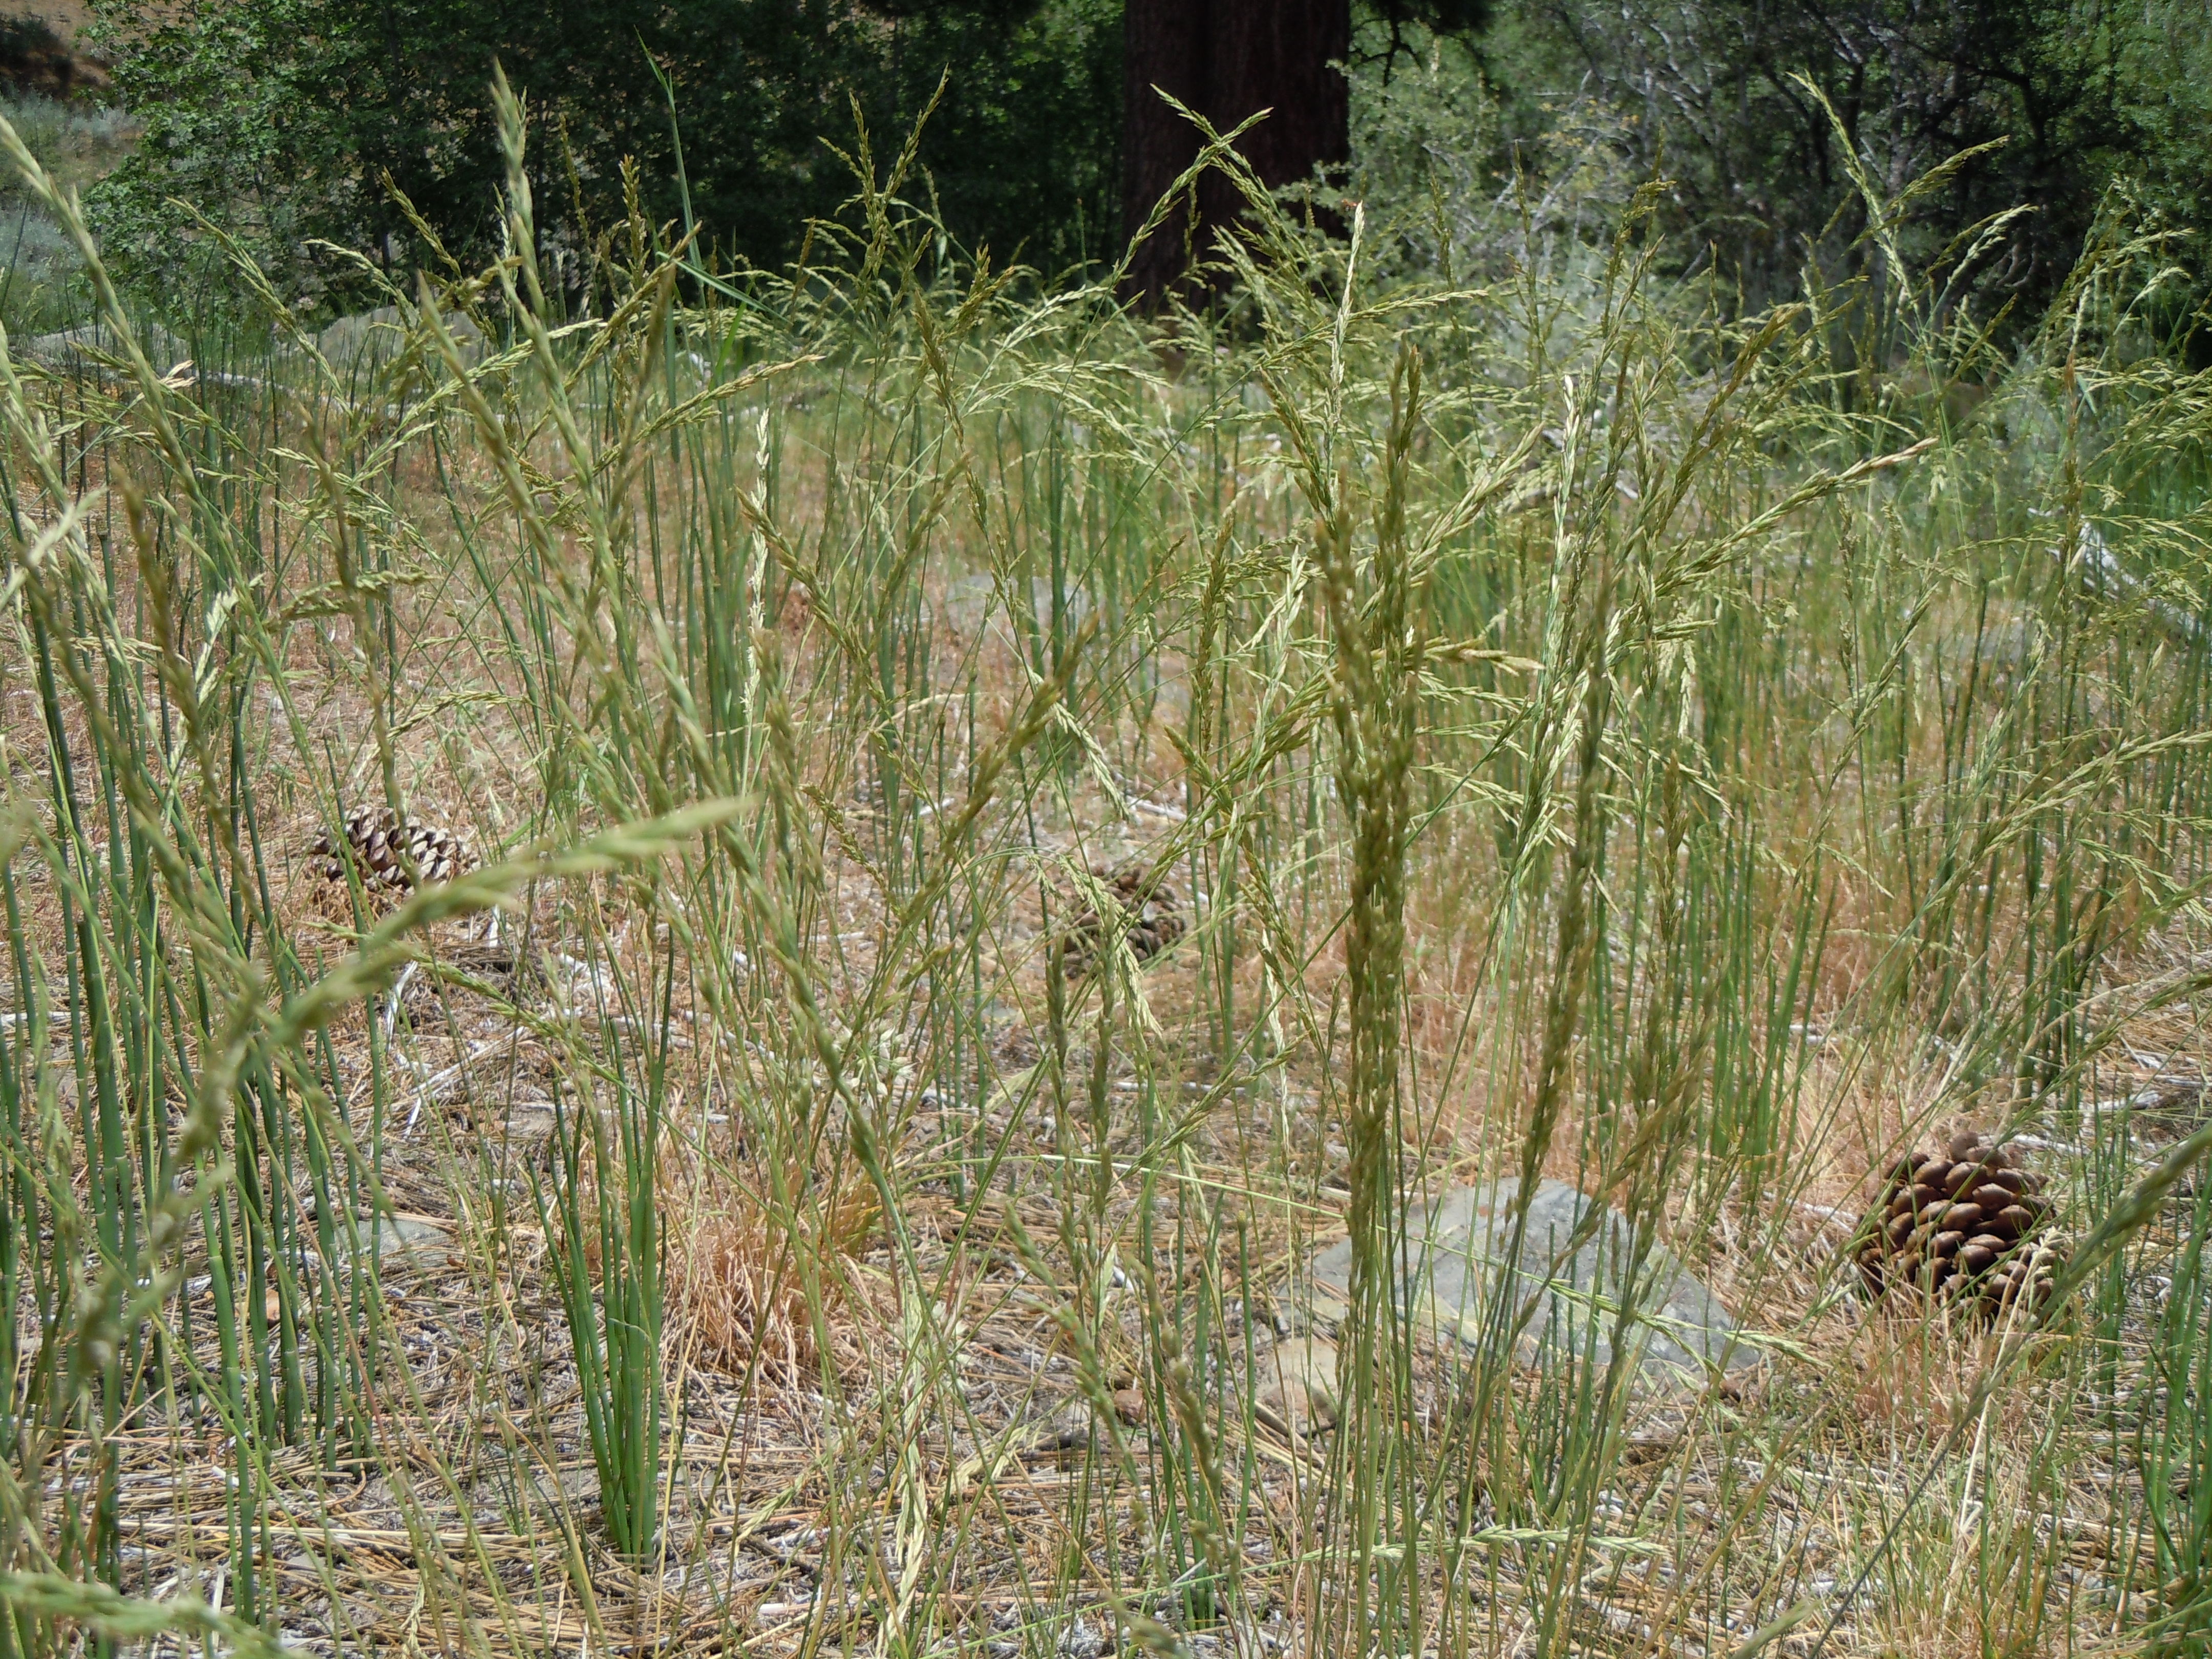 A community of smooth horsetail displaying its slightly clustered growth habit